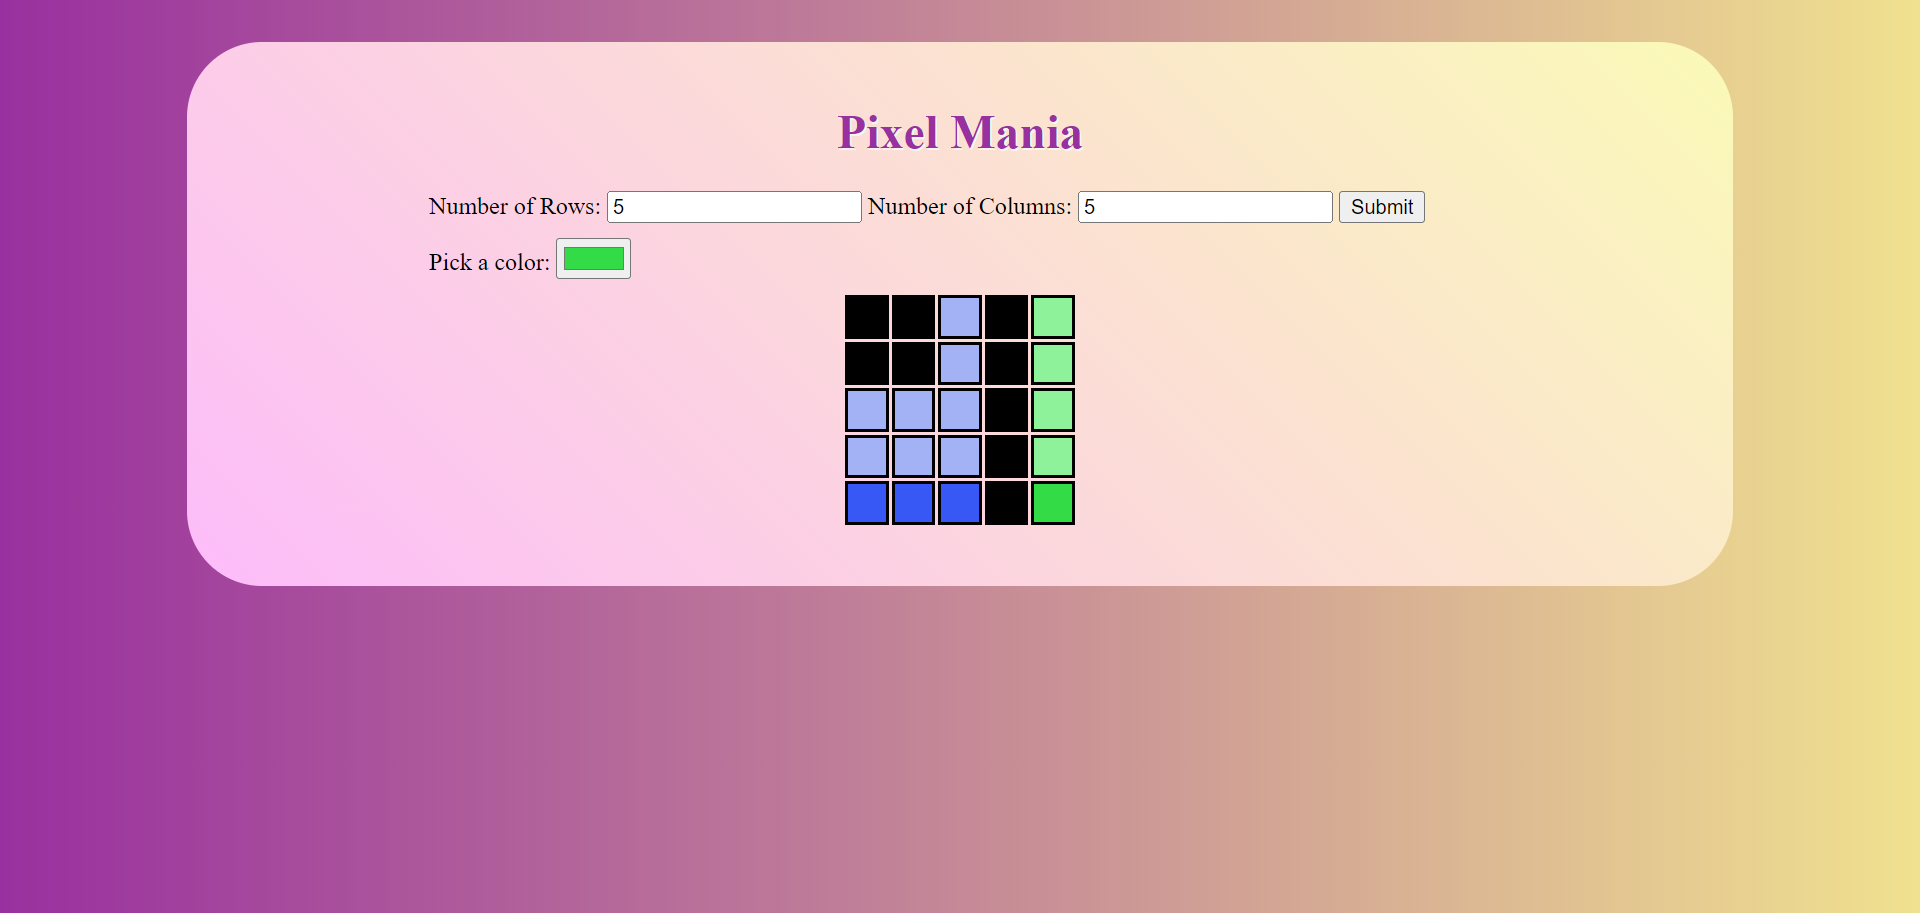 a pixel grid with inputs for rows and columns and color selector, has a gradient background